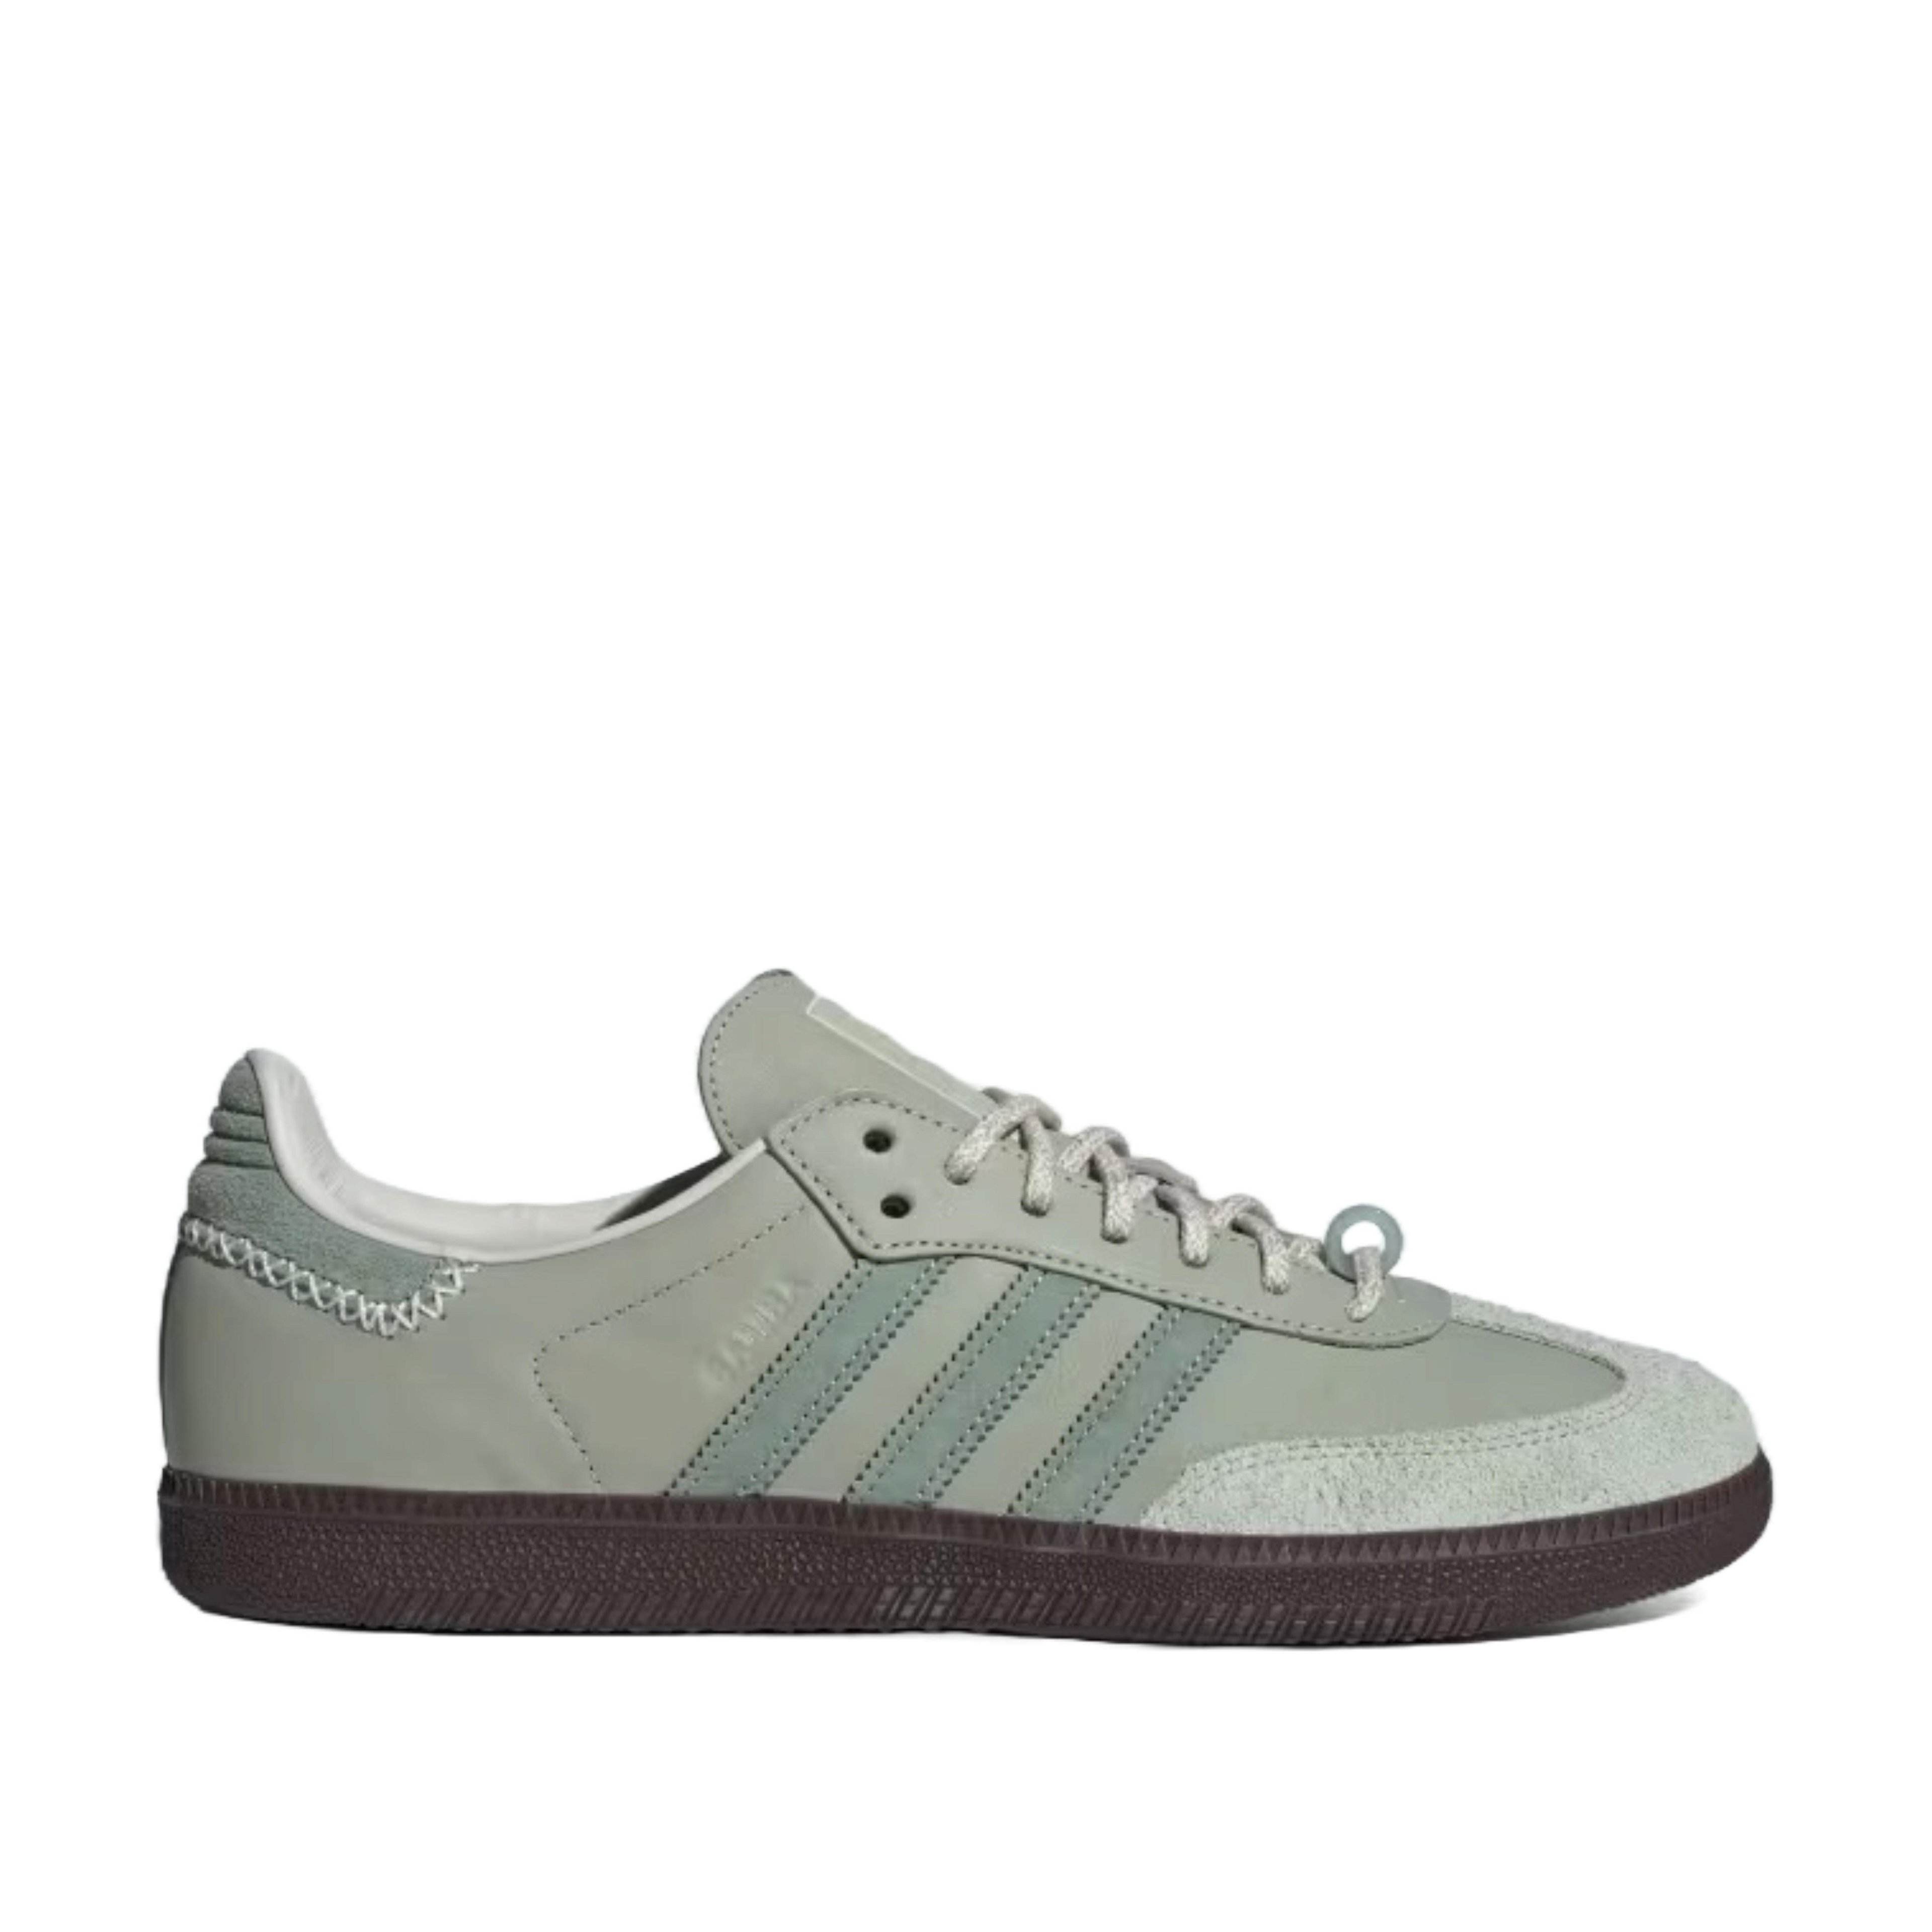 Adidas - Men's Samoa Maha Trainers - (Halo Green / Silver Green / Off White) by ADIDAS